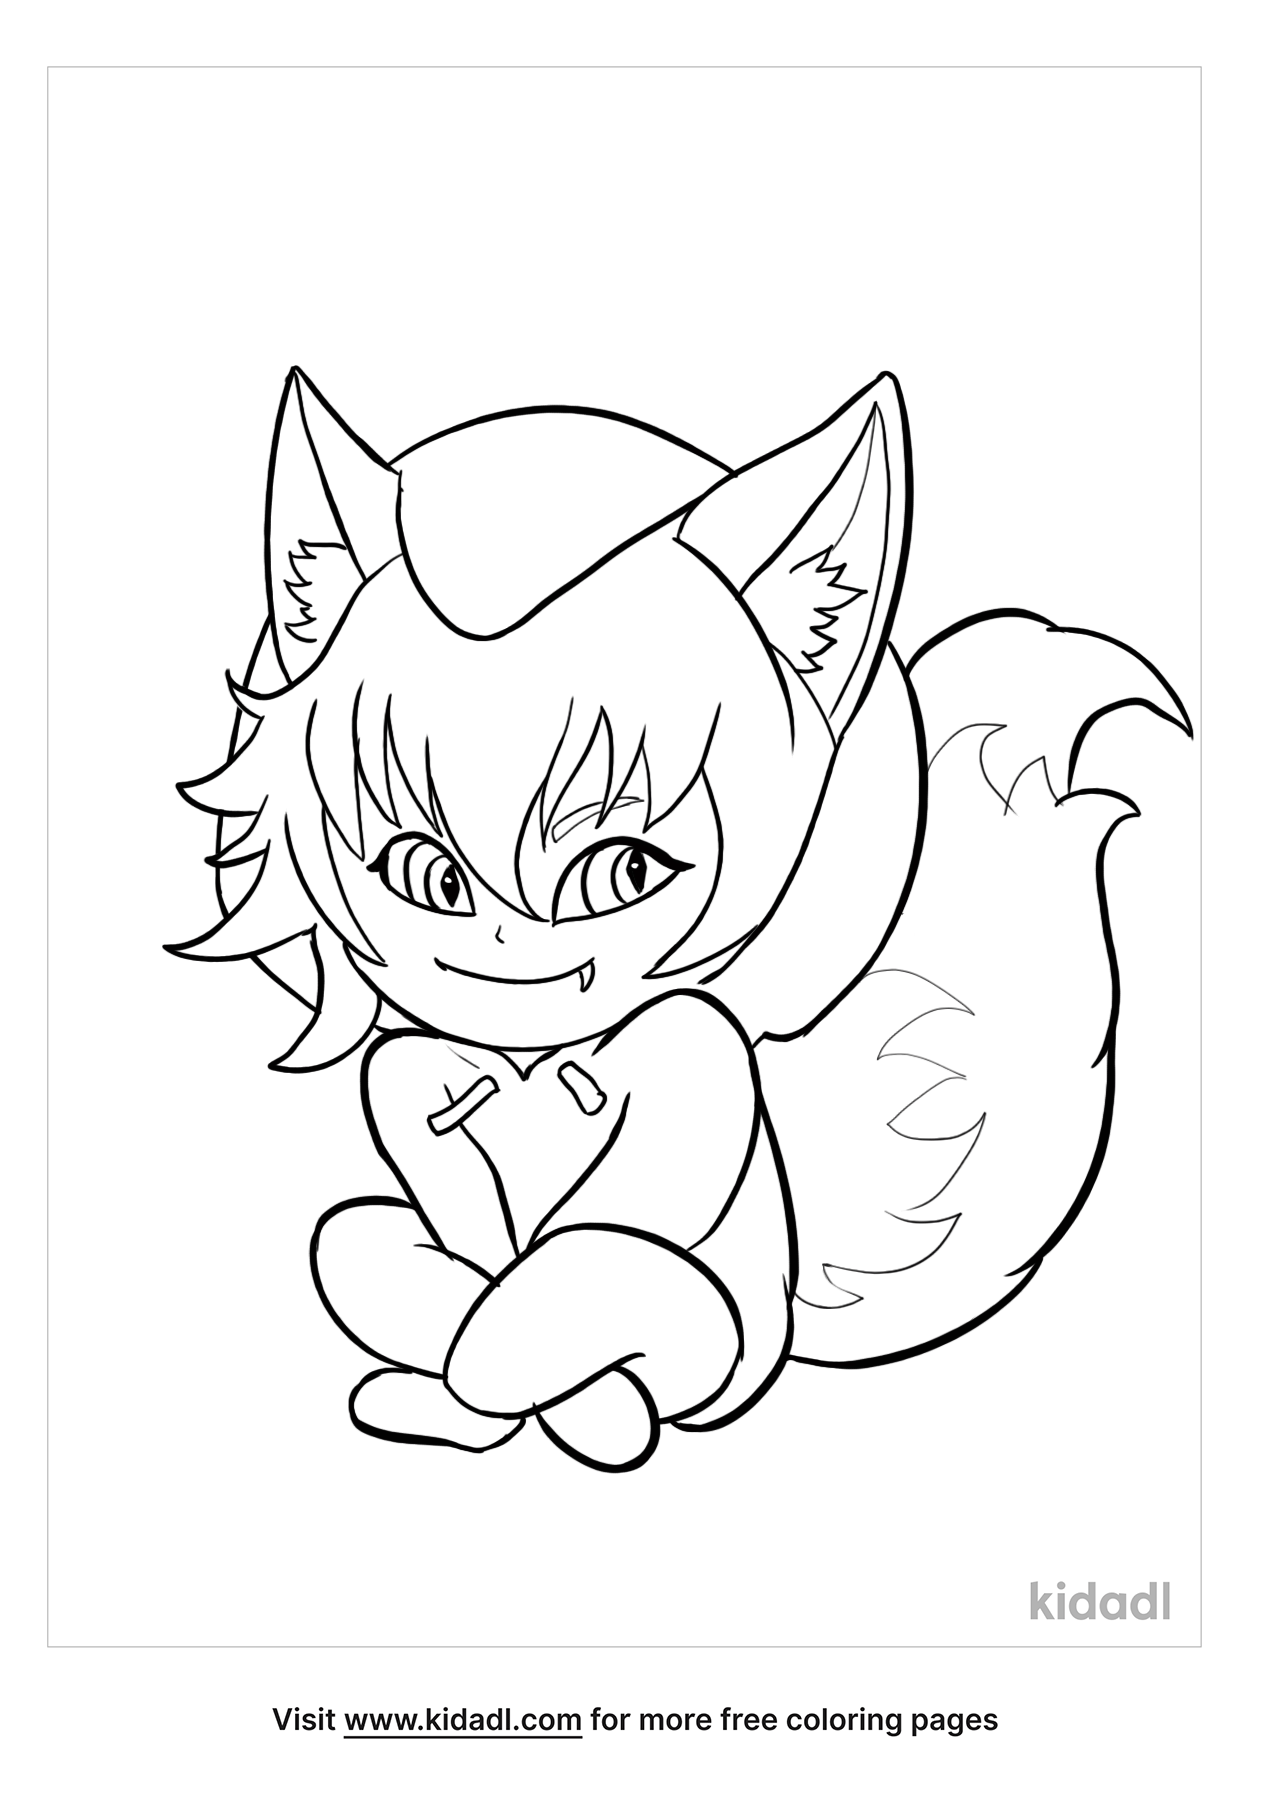 Chibi Wolf Girl Coloring Pages | Free Cartoons Coloring Pages | Kidadl